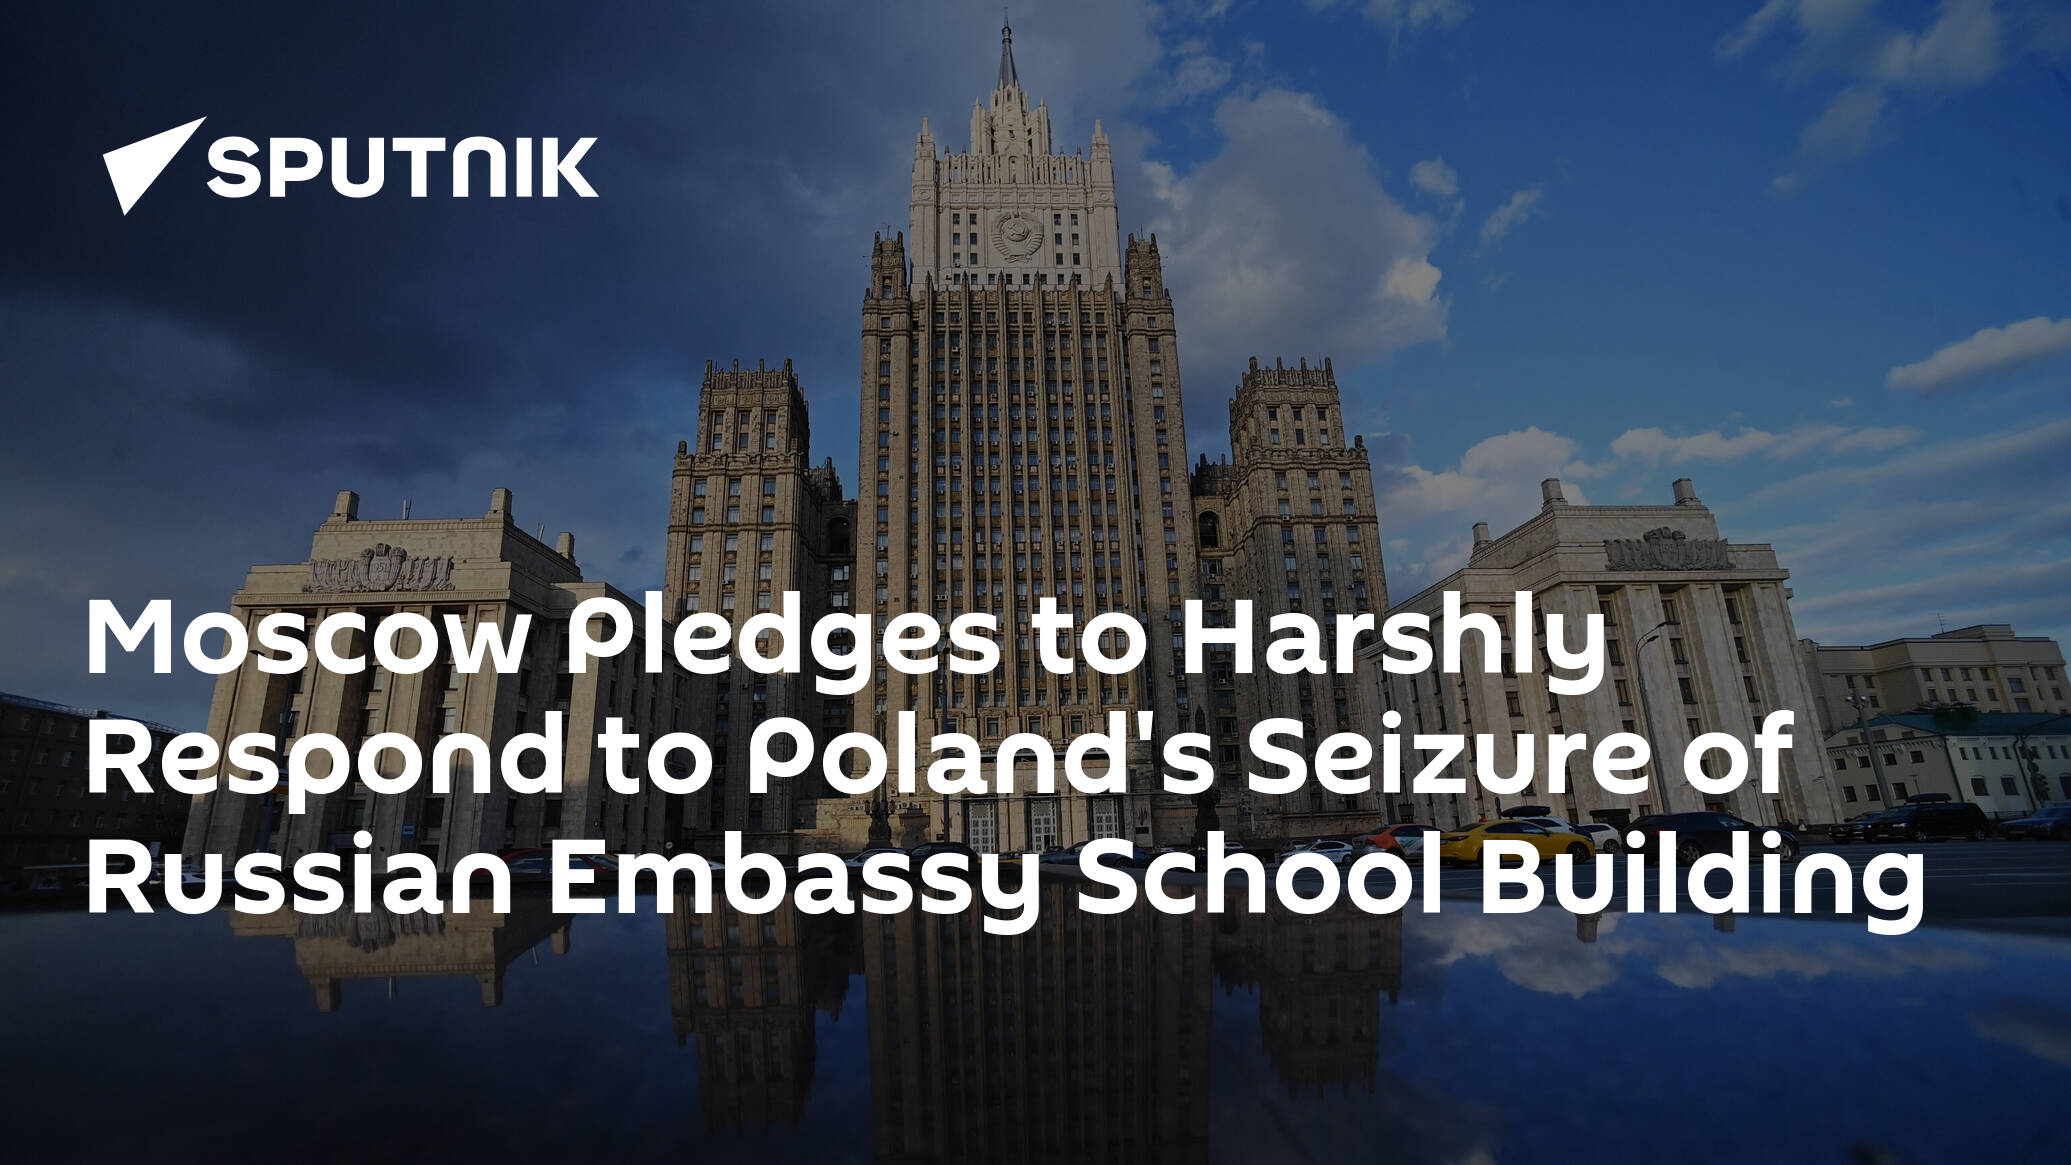 Moscow Pledges to Harshly Respond to Poland's Seizure of Russian Embassy School Building